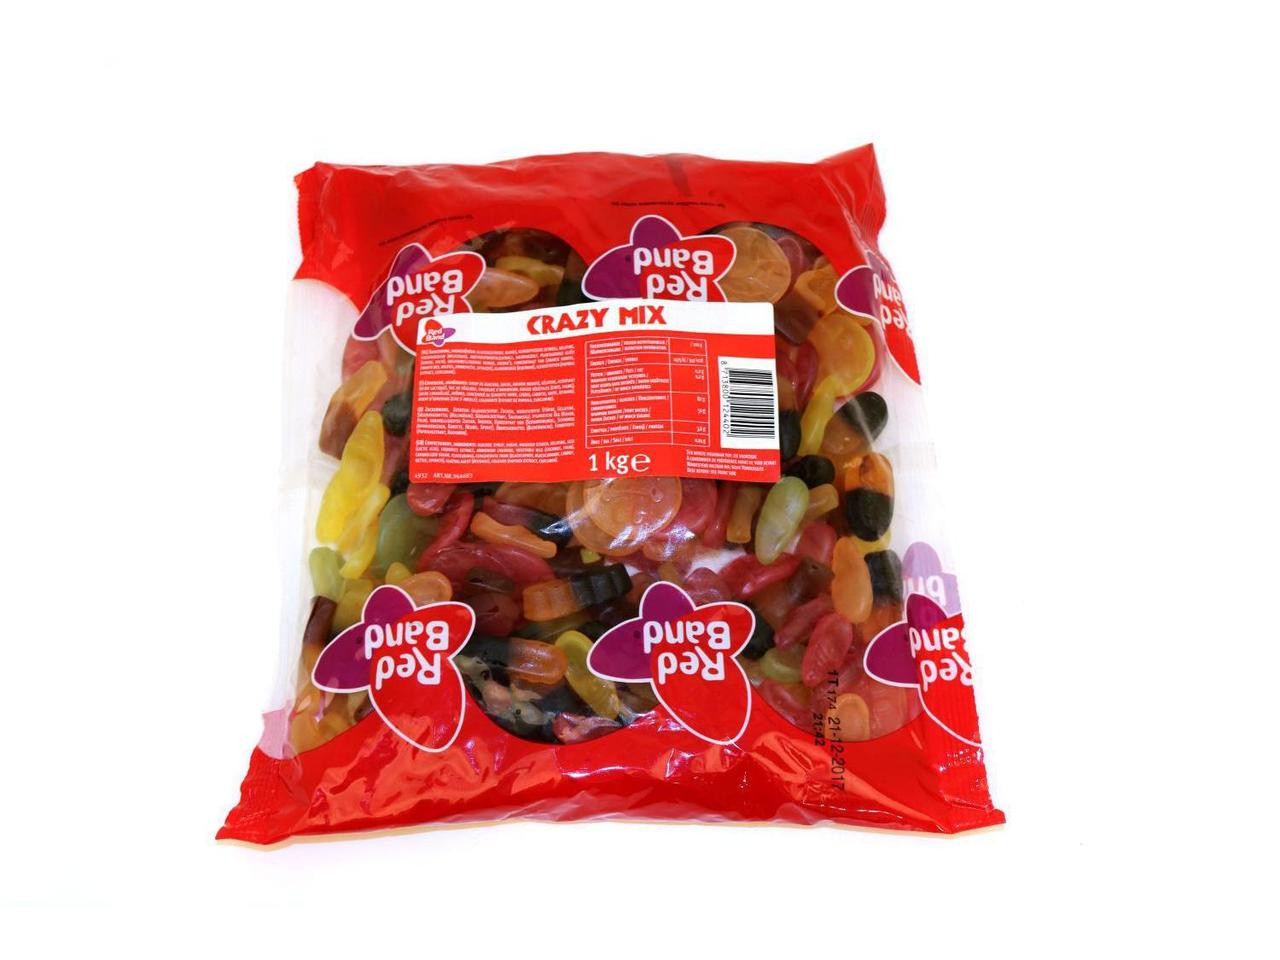 RED BAND CRAZY MIX 1kg